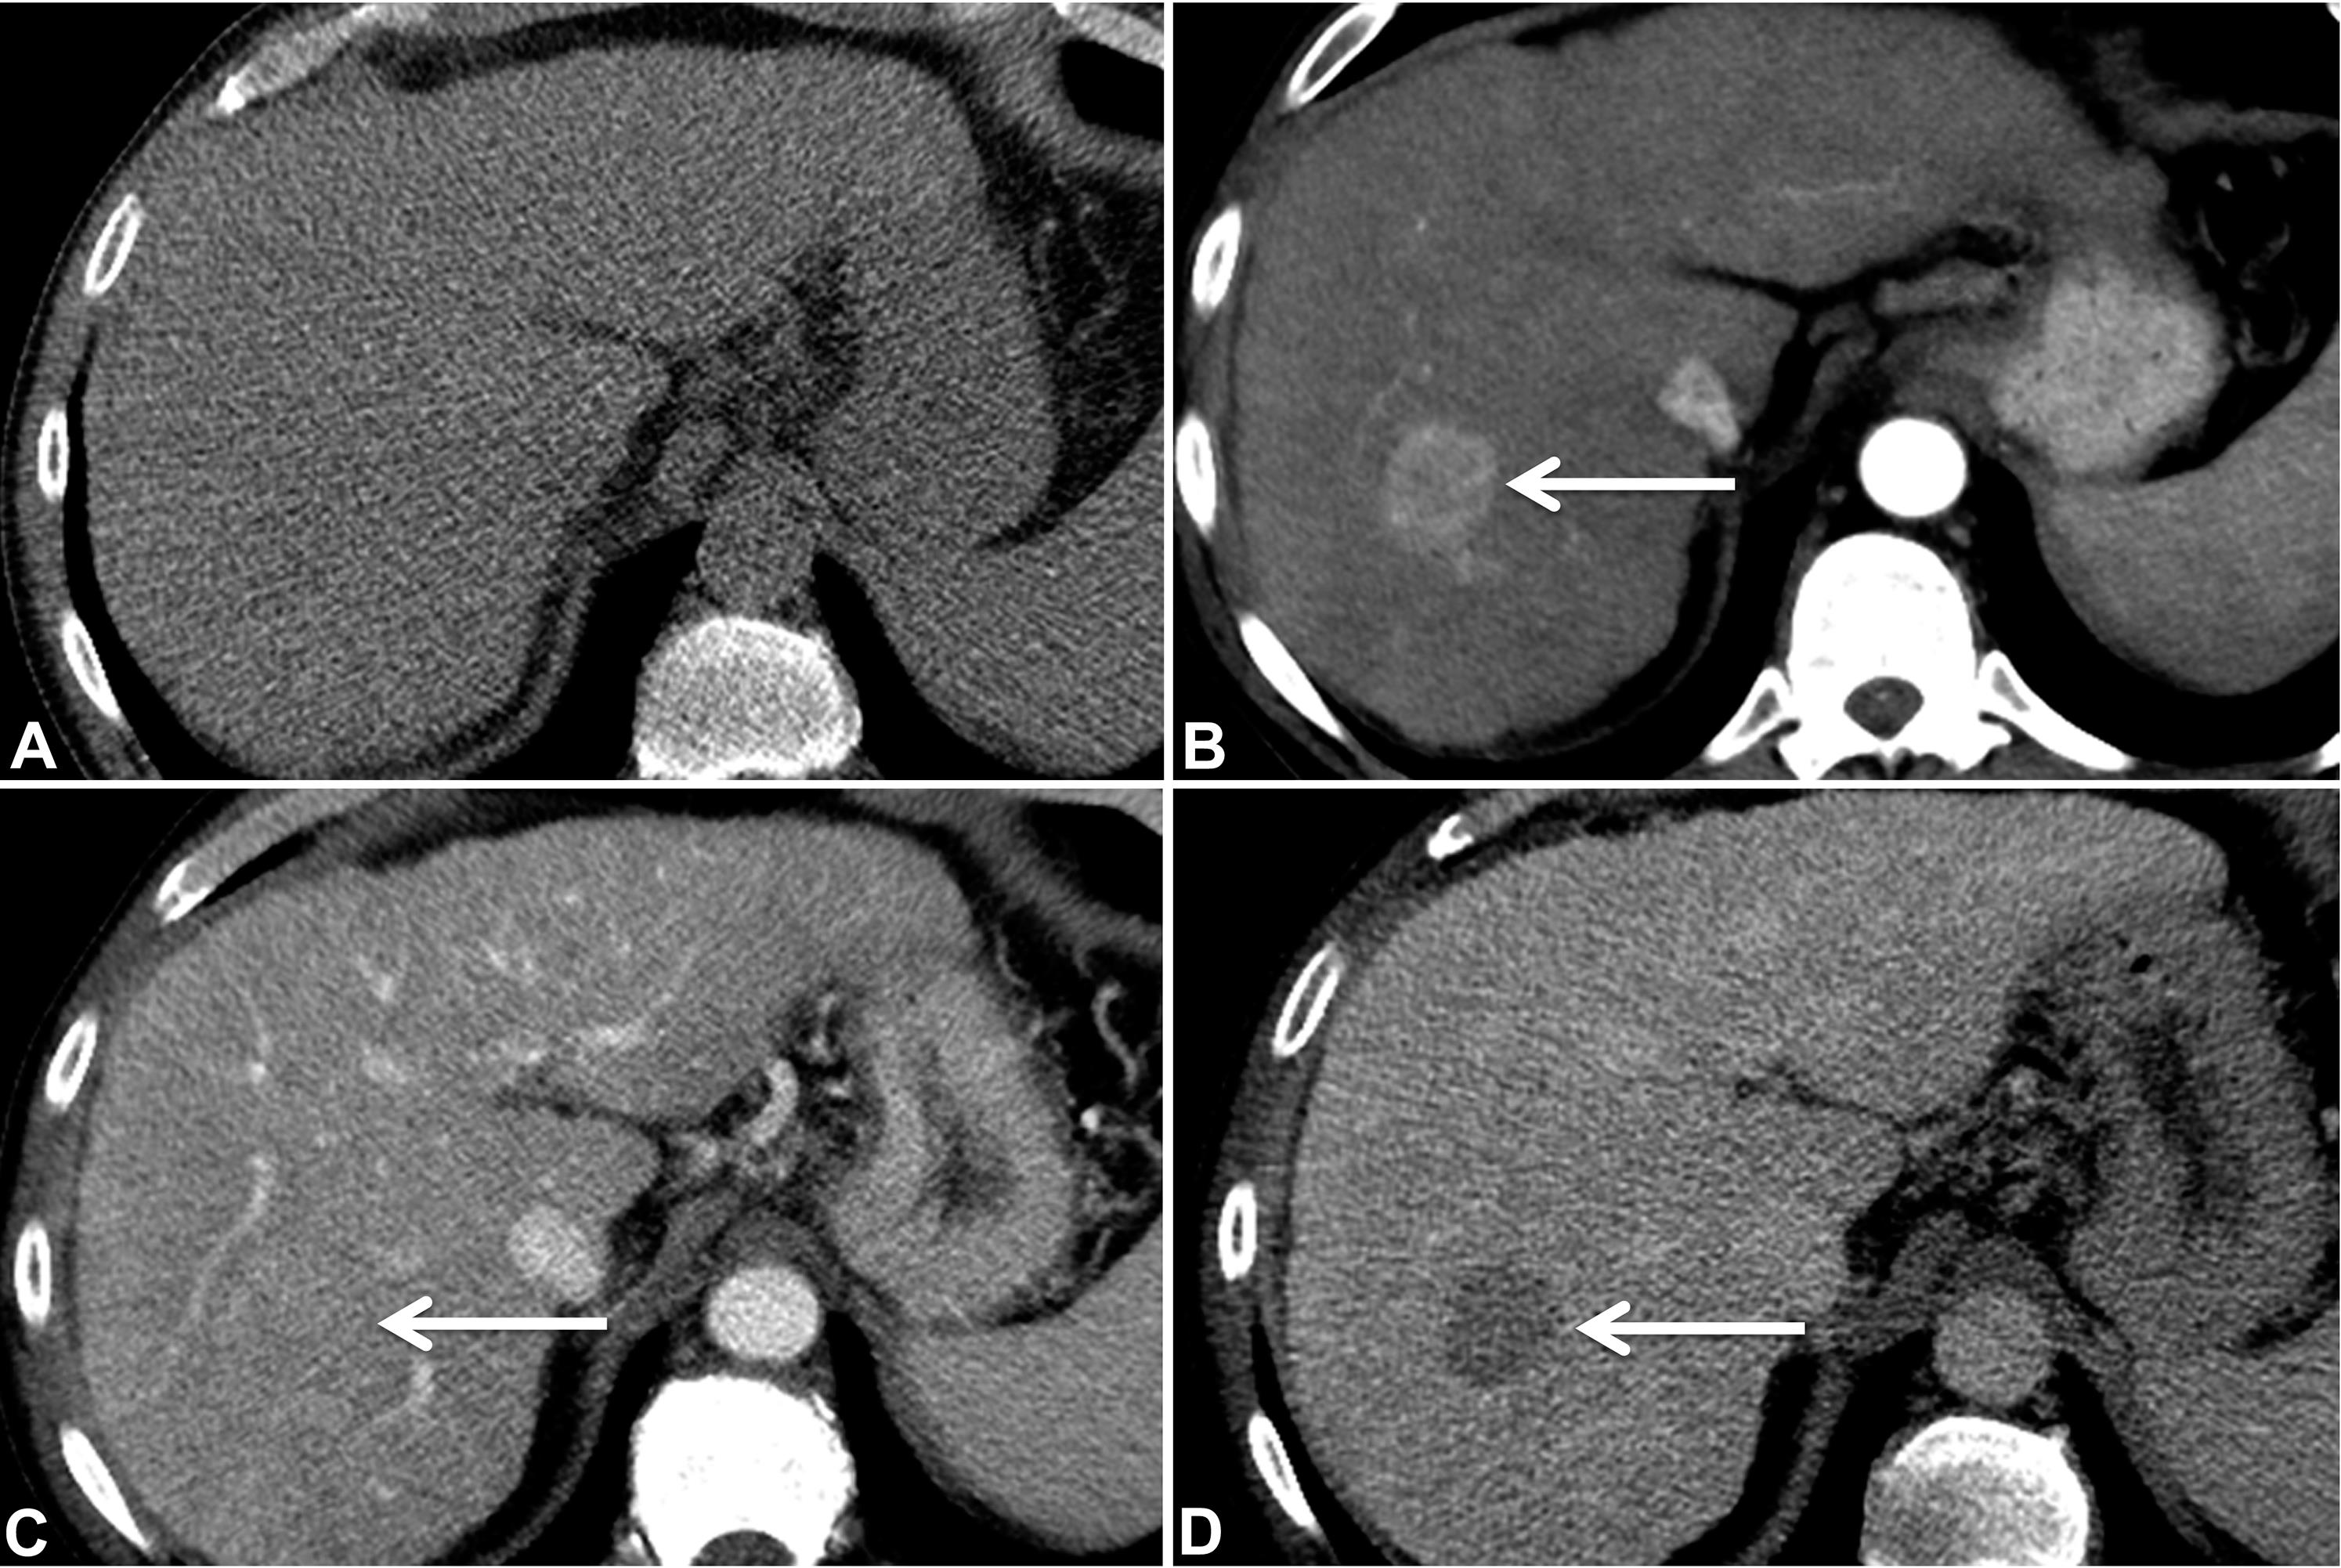 Multiphase contrast-enhanced CT in a 55 year-old woman with cirrhosis.